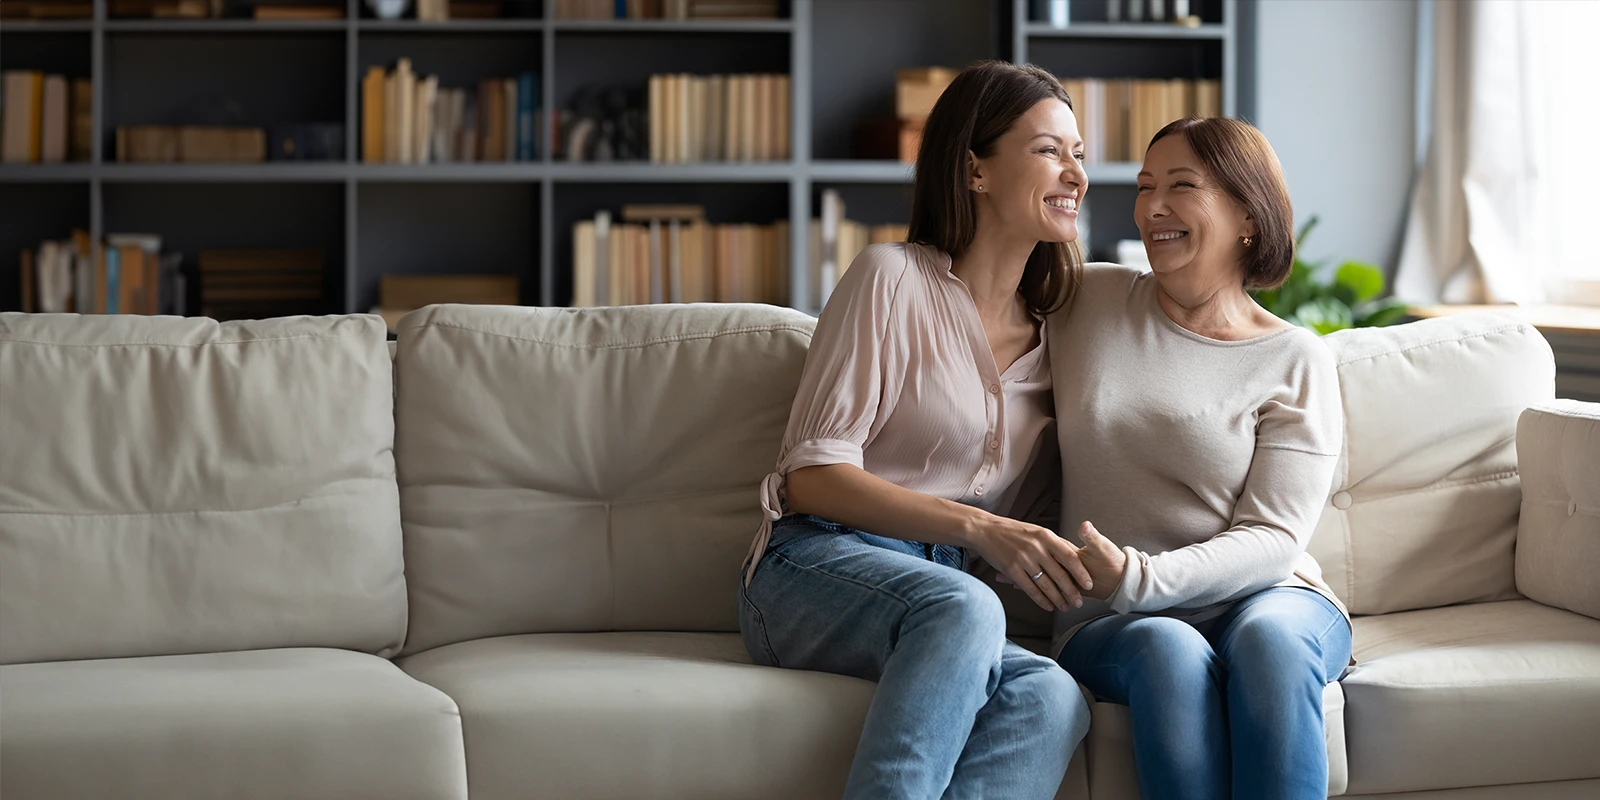 A mother and daughter sitting on a couch laughing together.